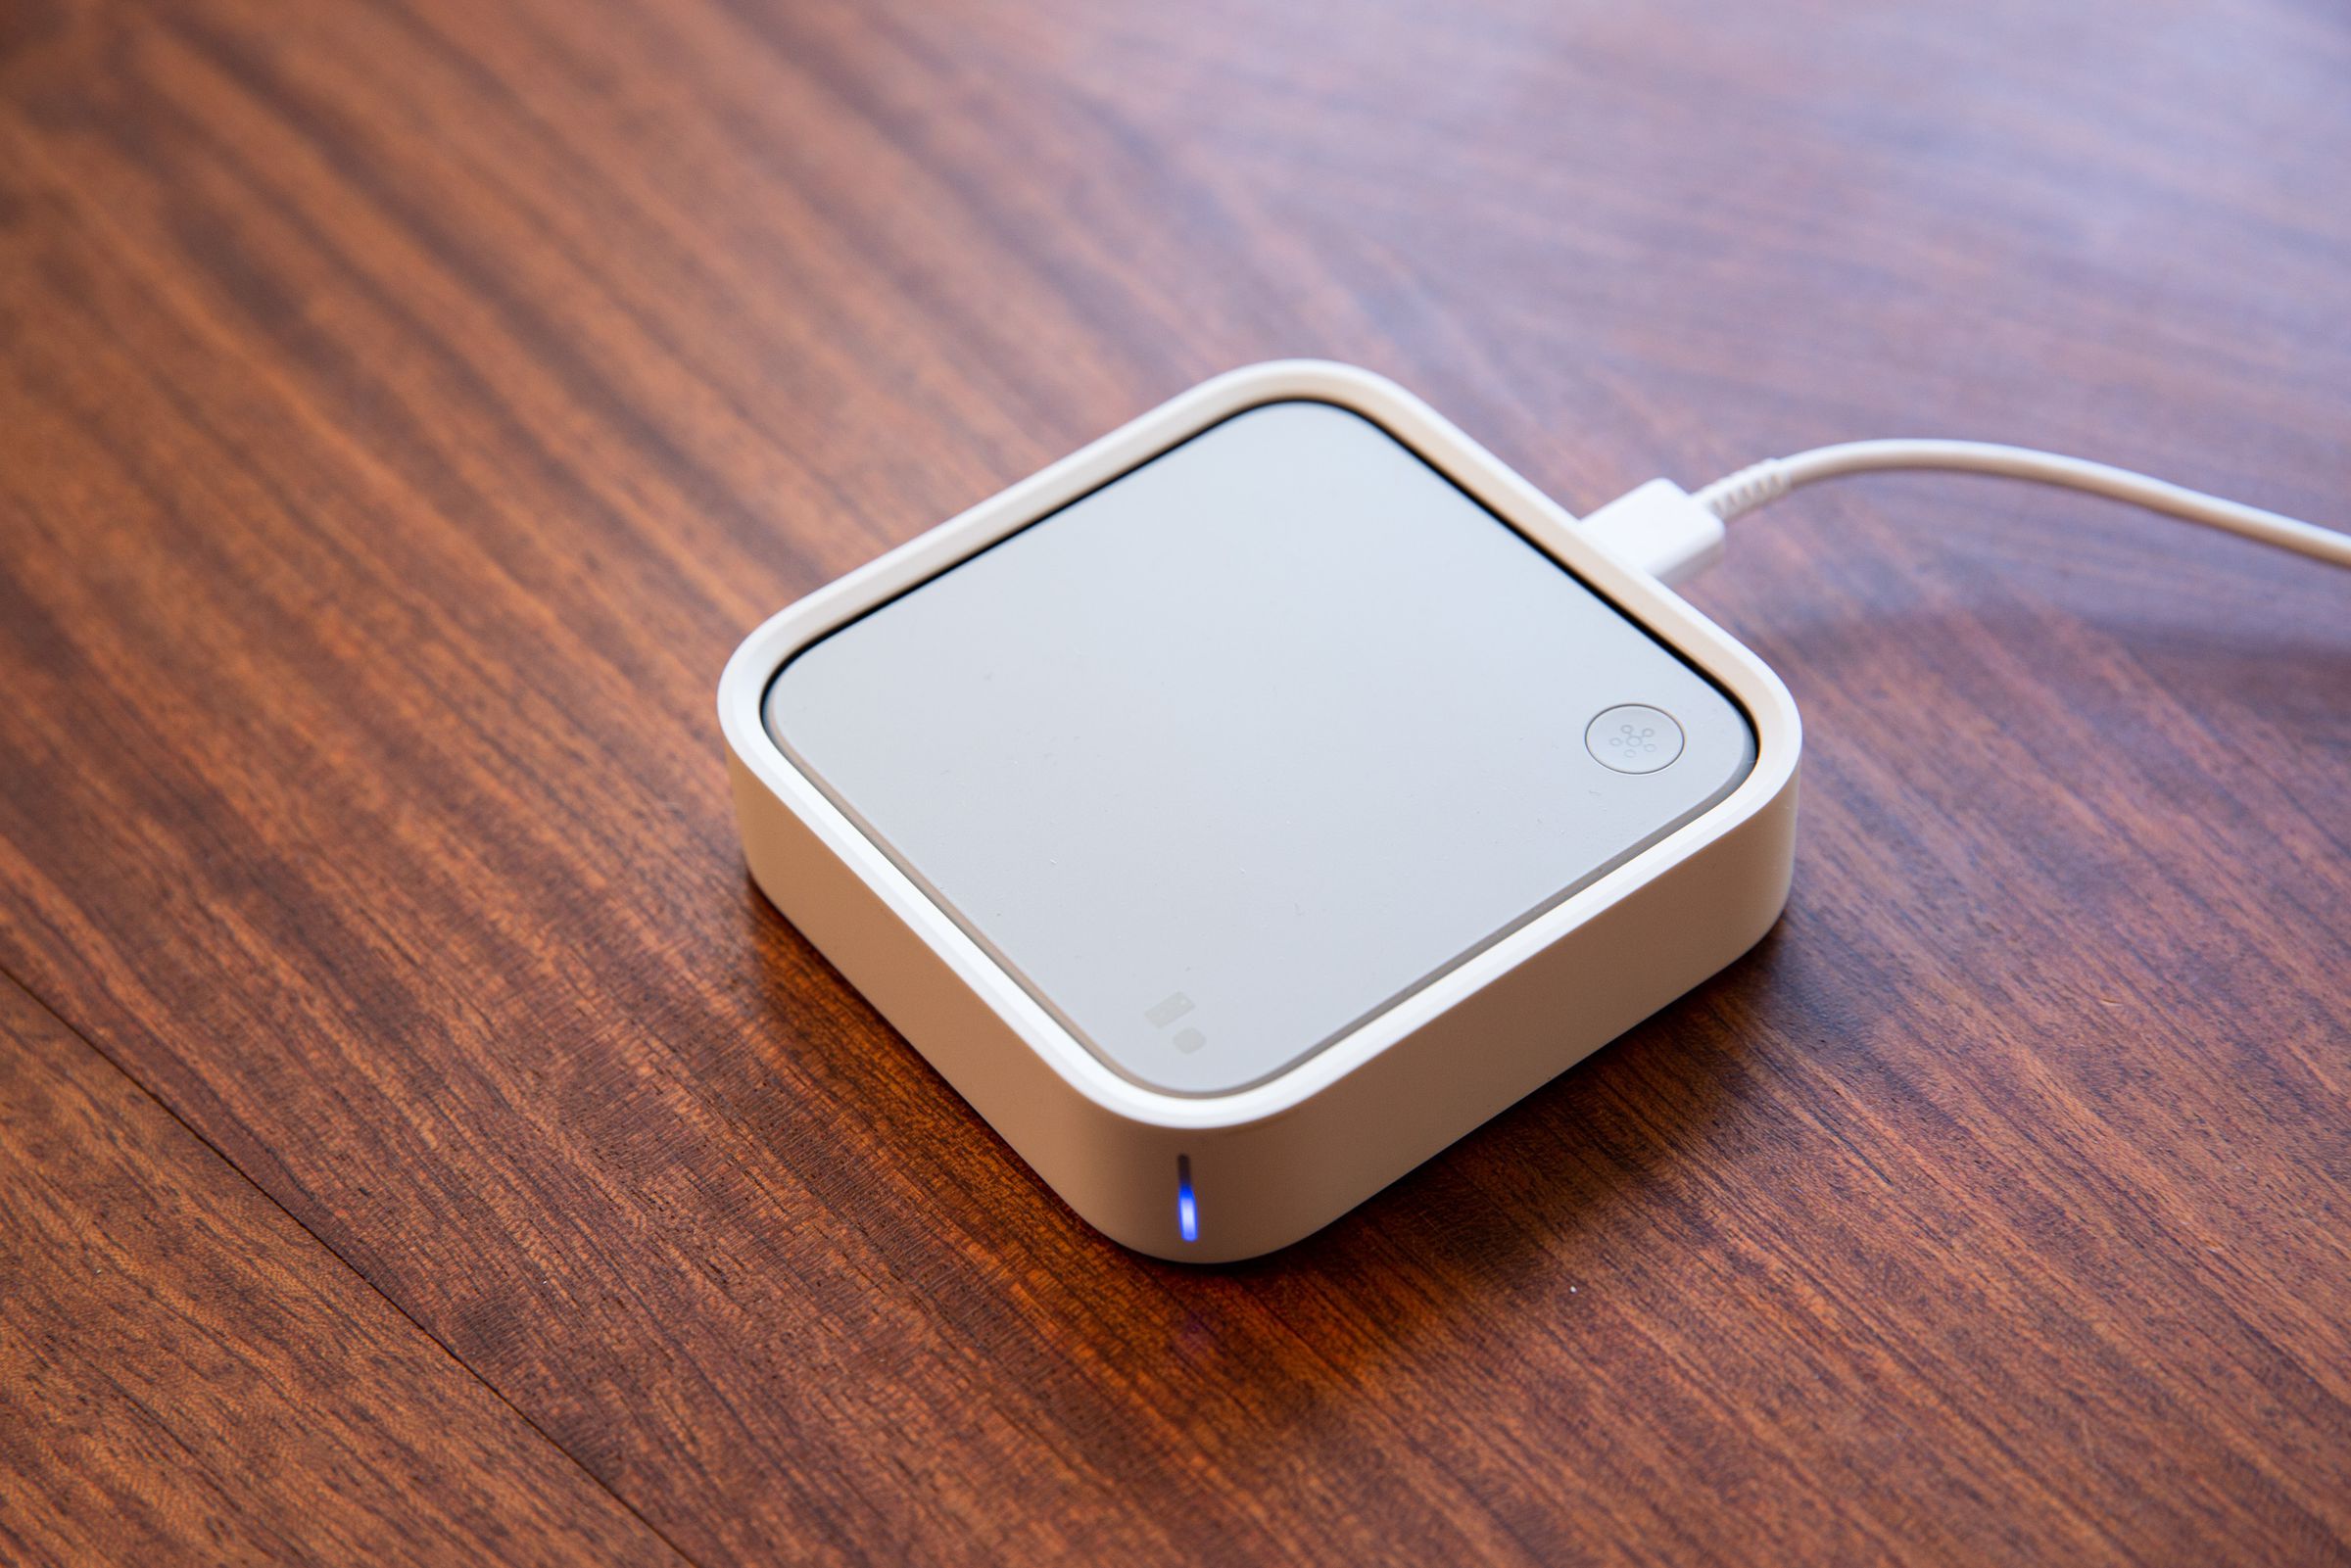 The SmartThings button gives you physical control over smart home devices.